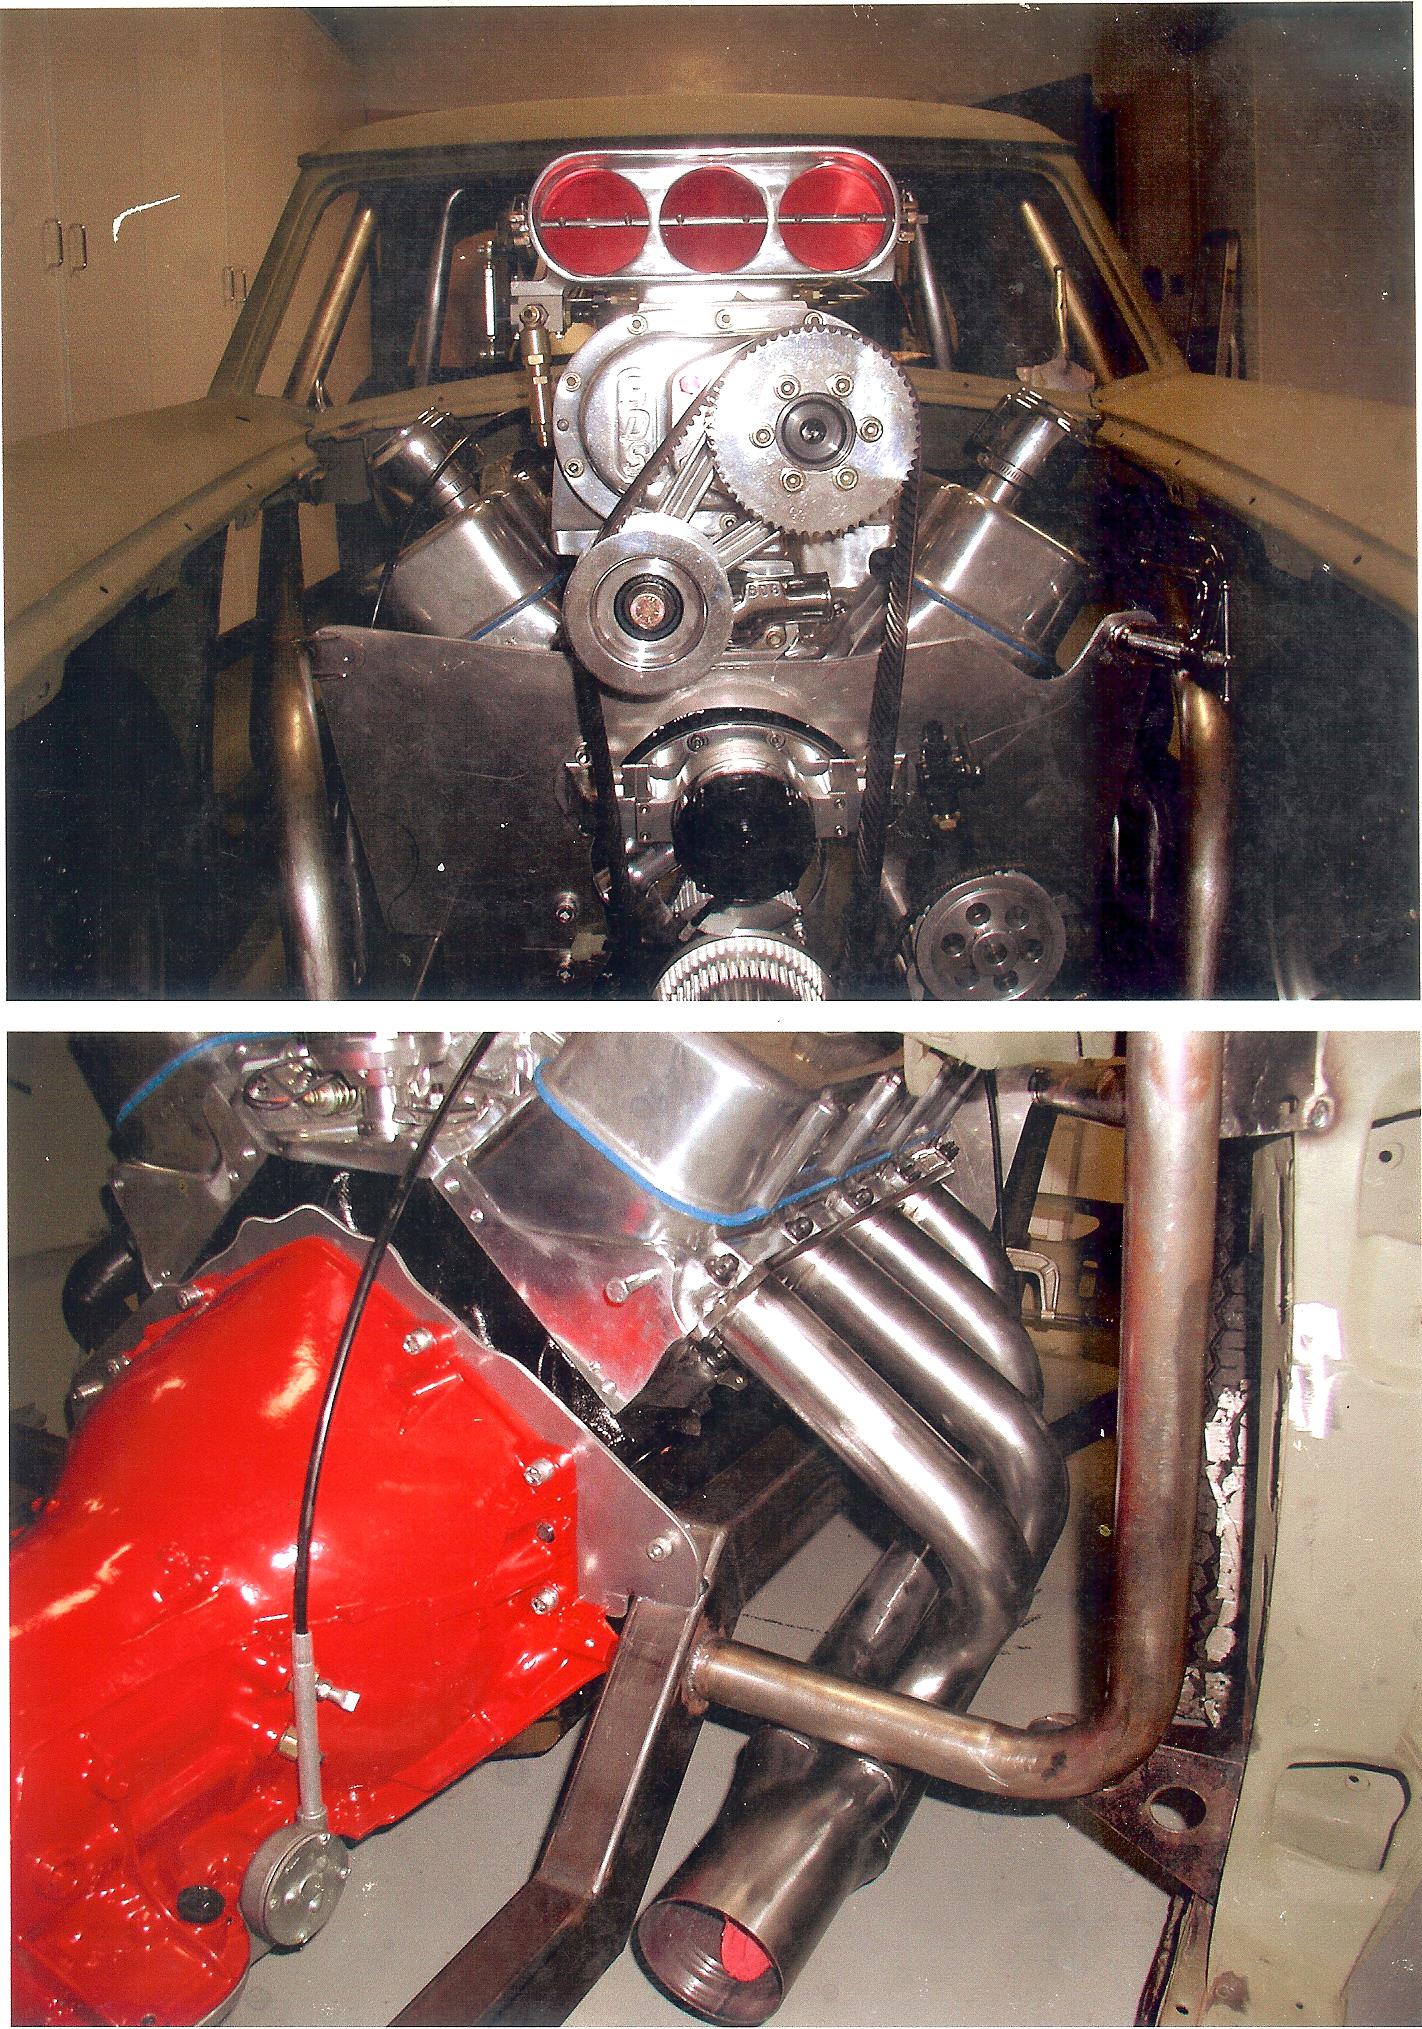 Two View of the Engine